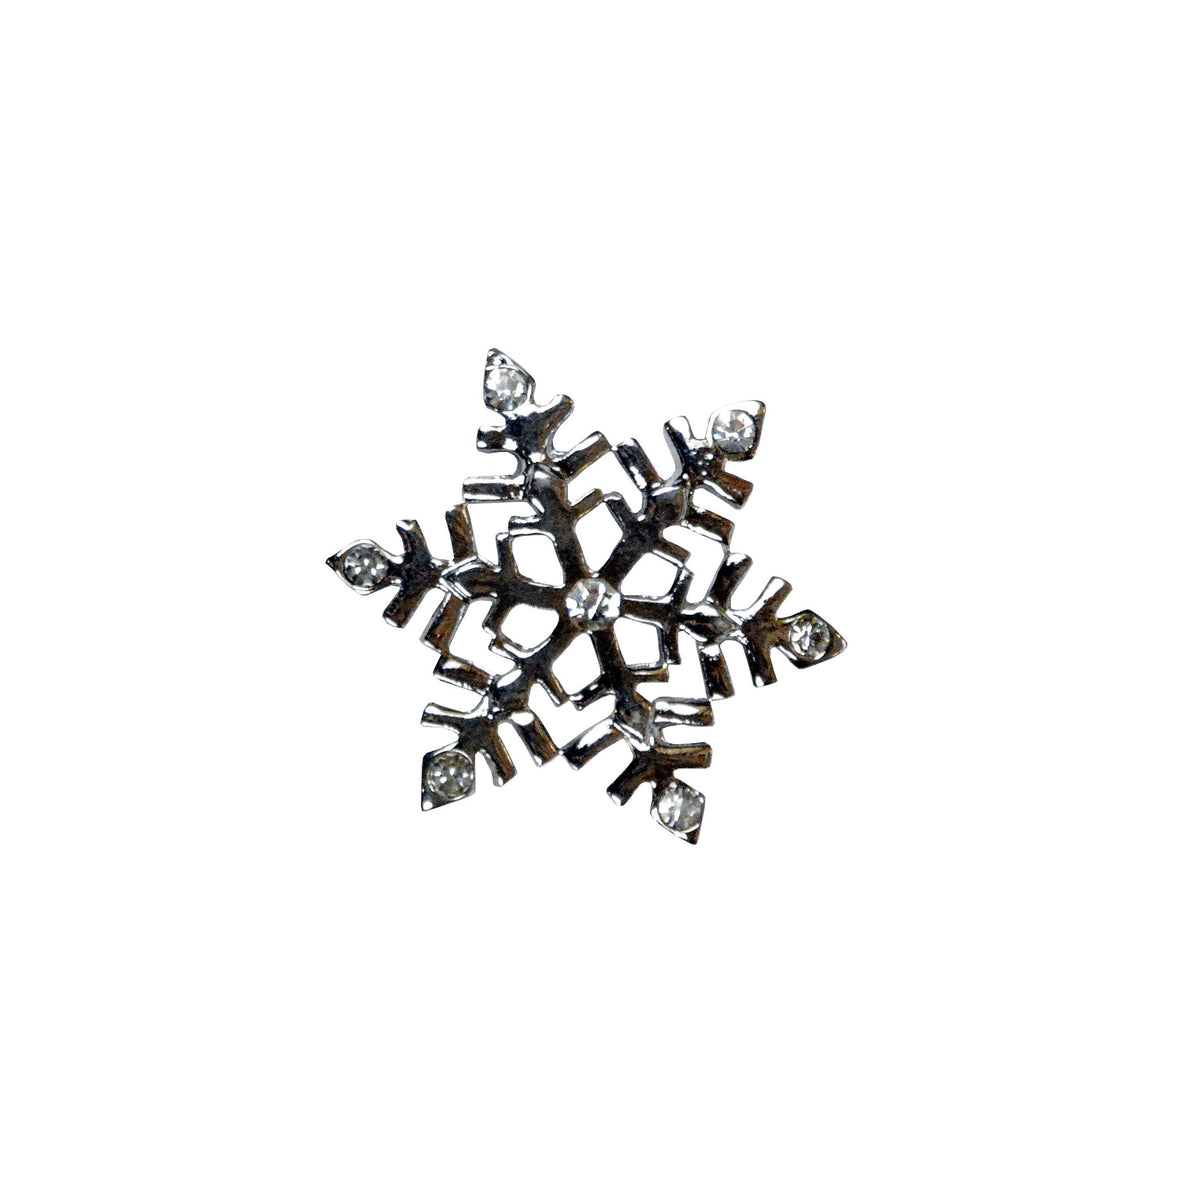 Rhinestone Brooches - Snowflakes (One Small Left!)